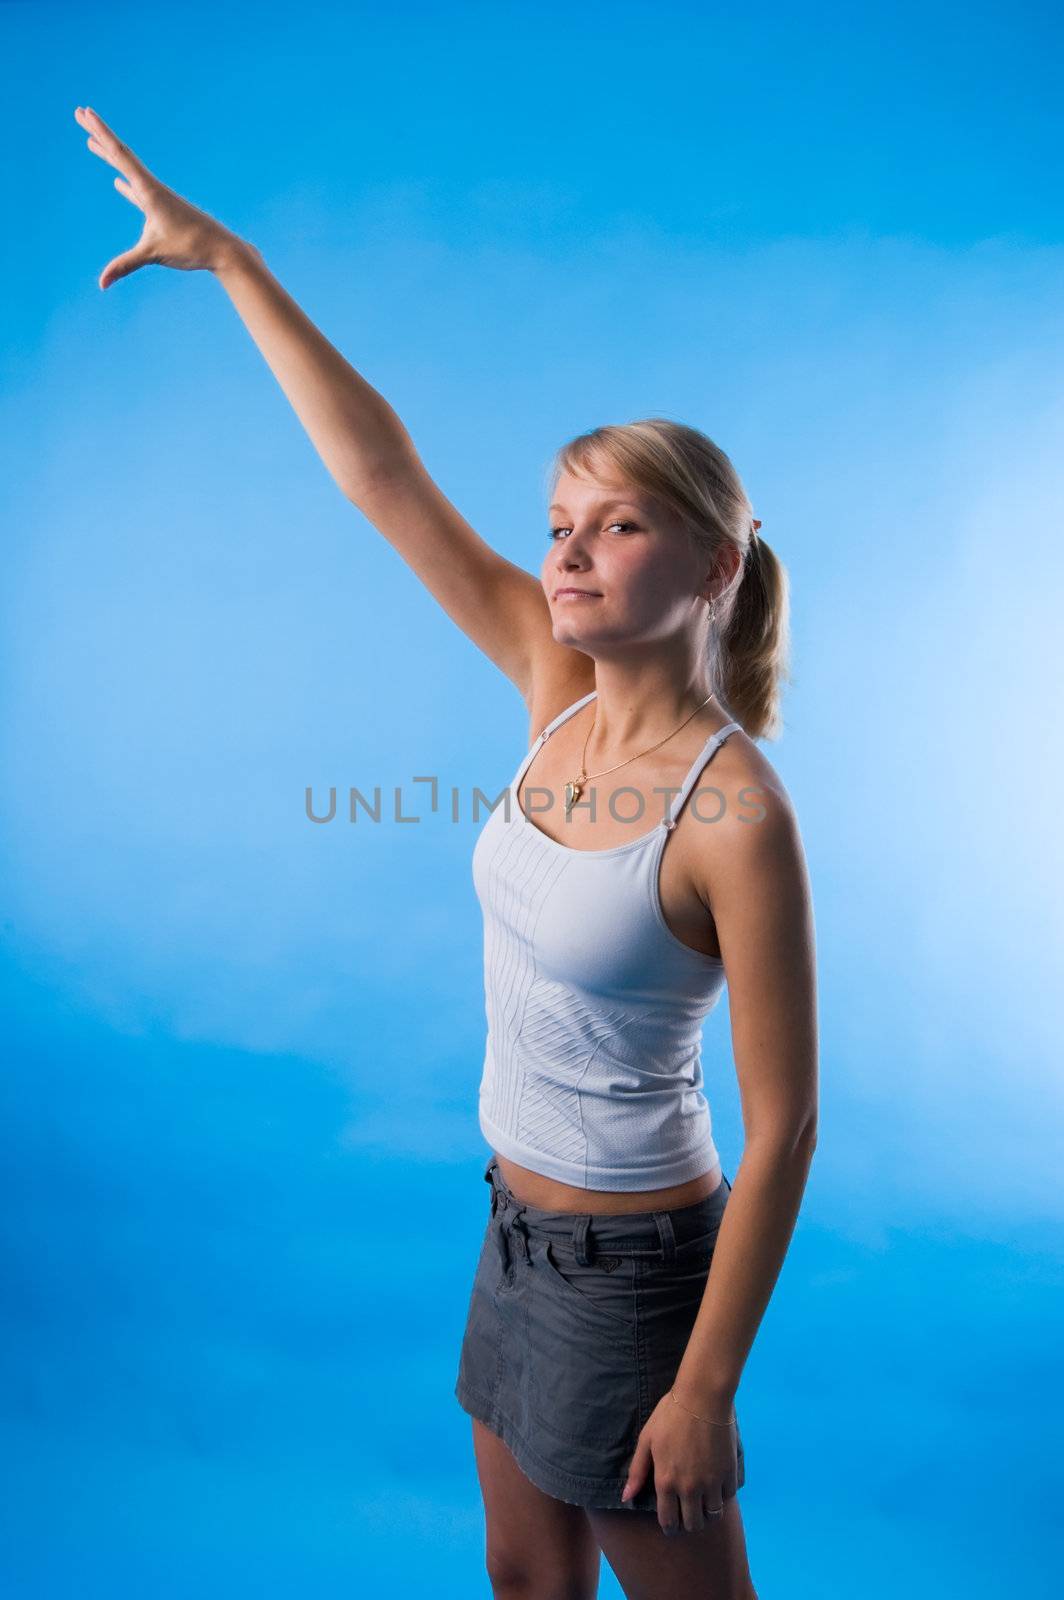 The girl in a white vest tries to reach the sky